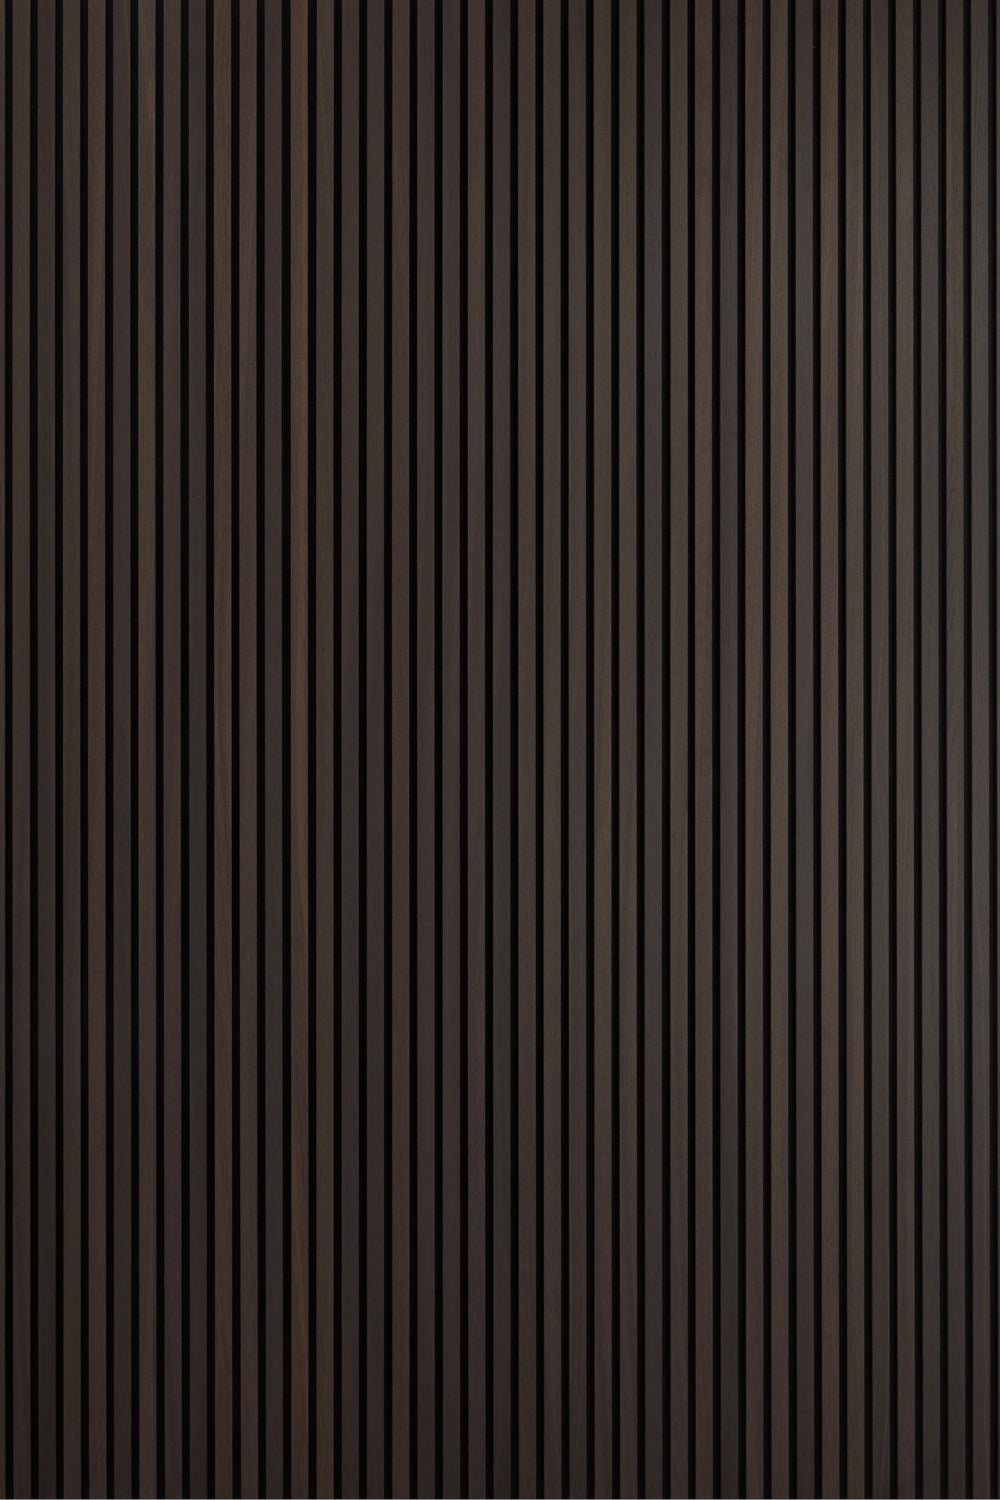 A display of three Smoked Oak Acoustic SlatWall Panels from Naturewall, on felt backing. 